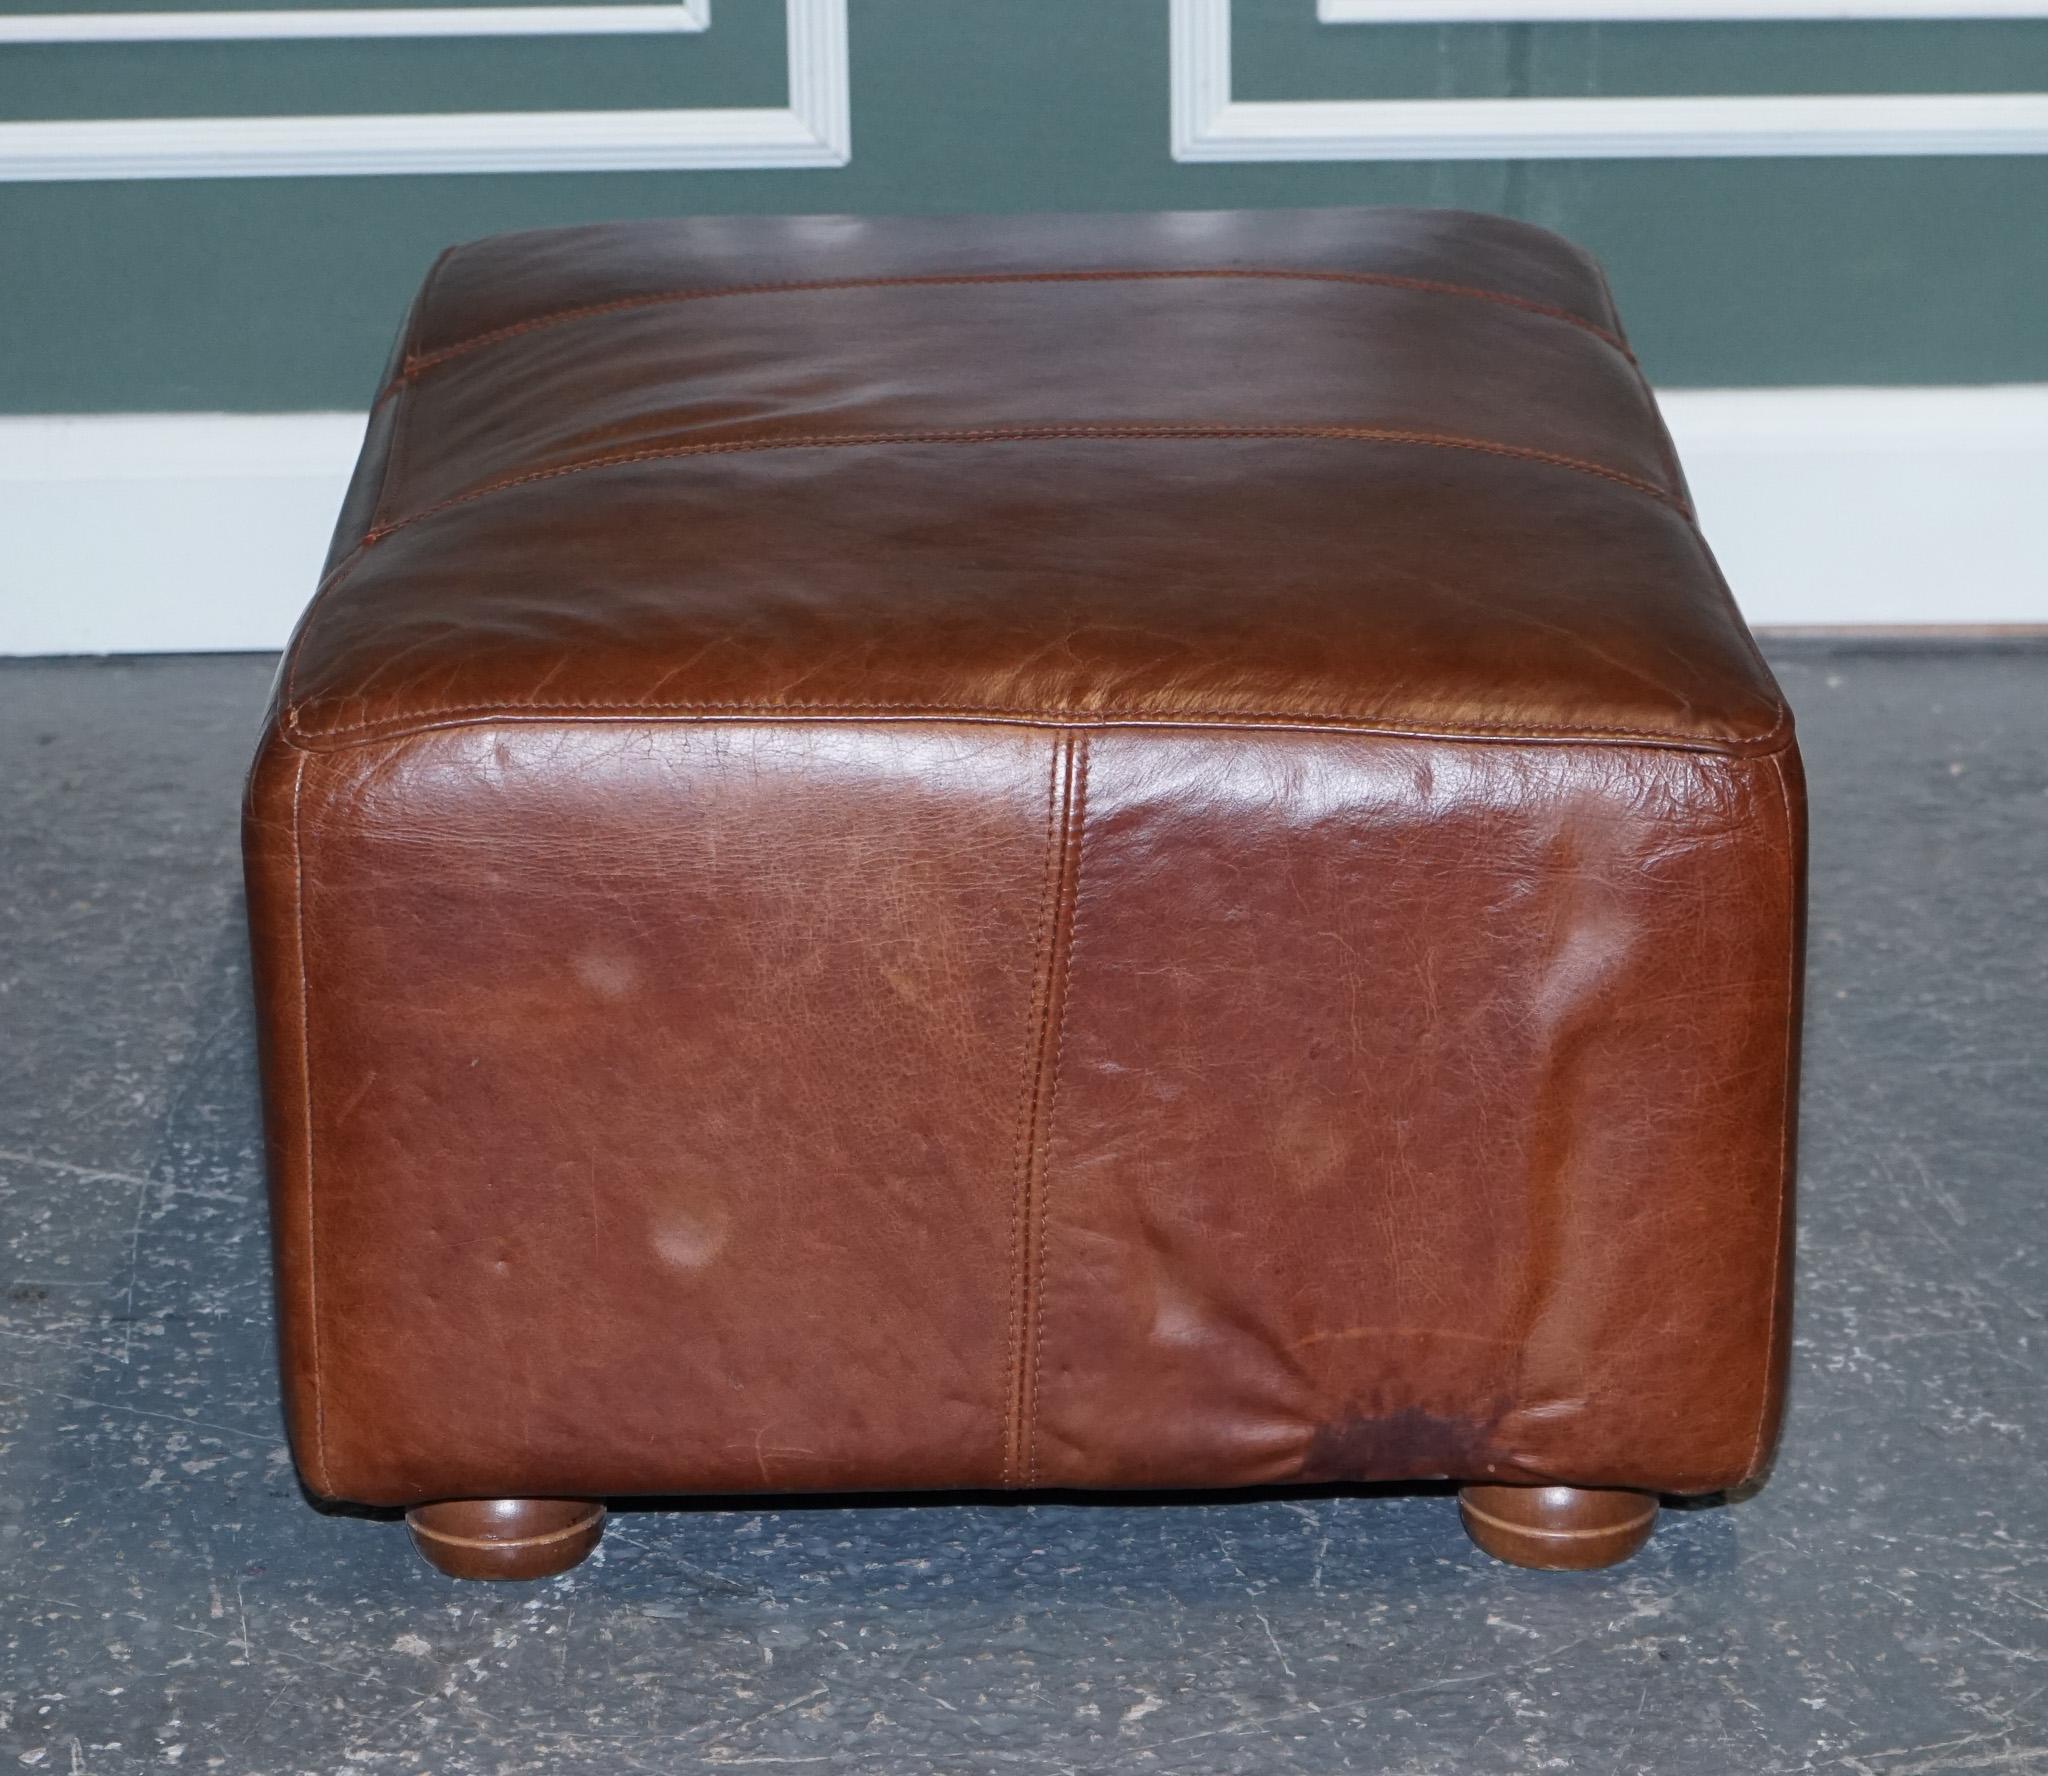 Hand-Crafted Large Vintage Brown Leather Footstool Ottoman Made by Halo